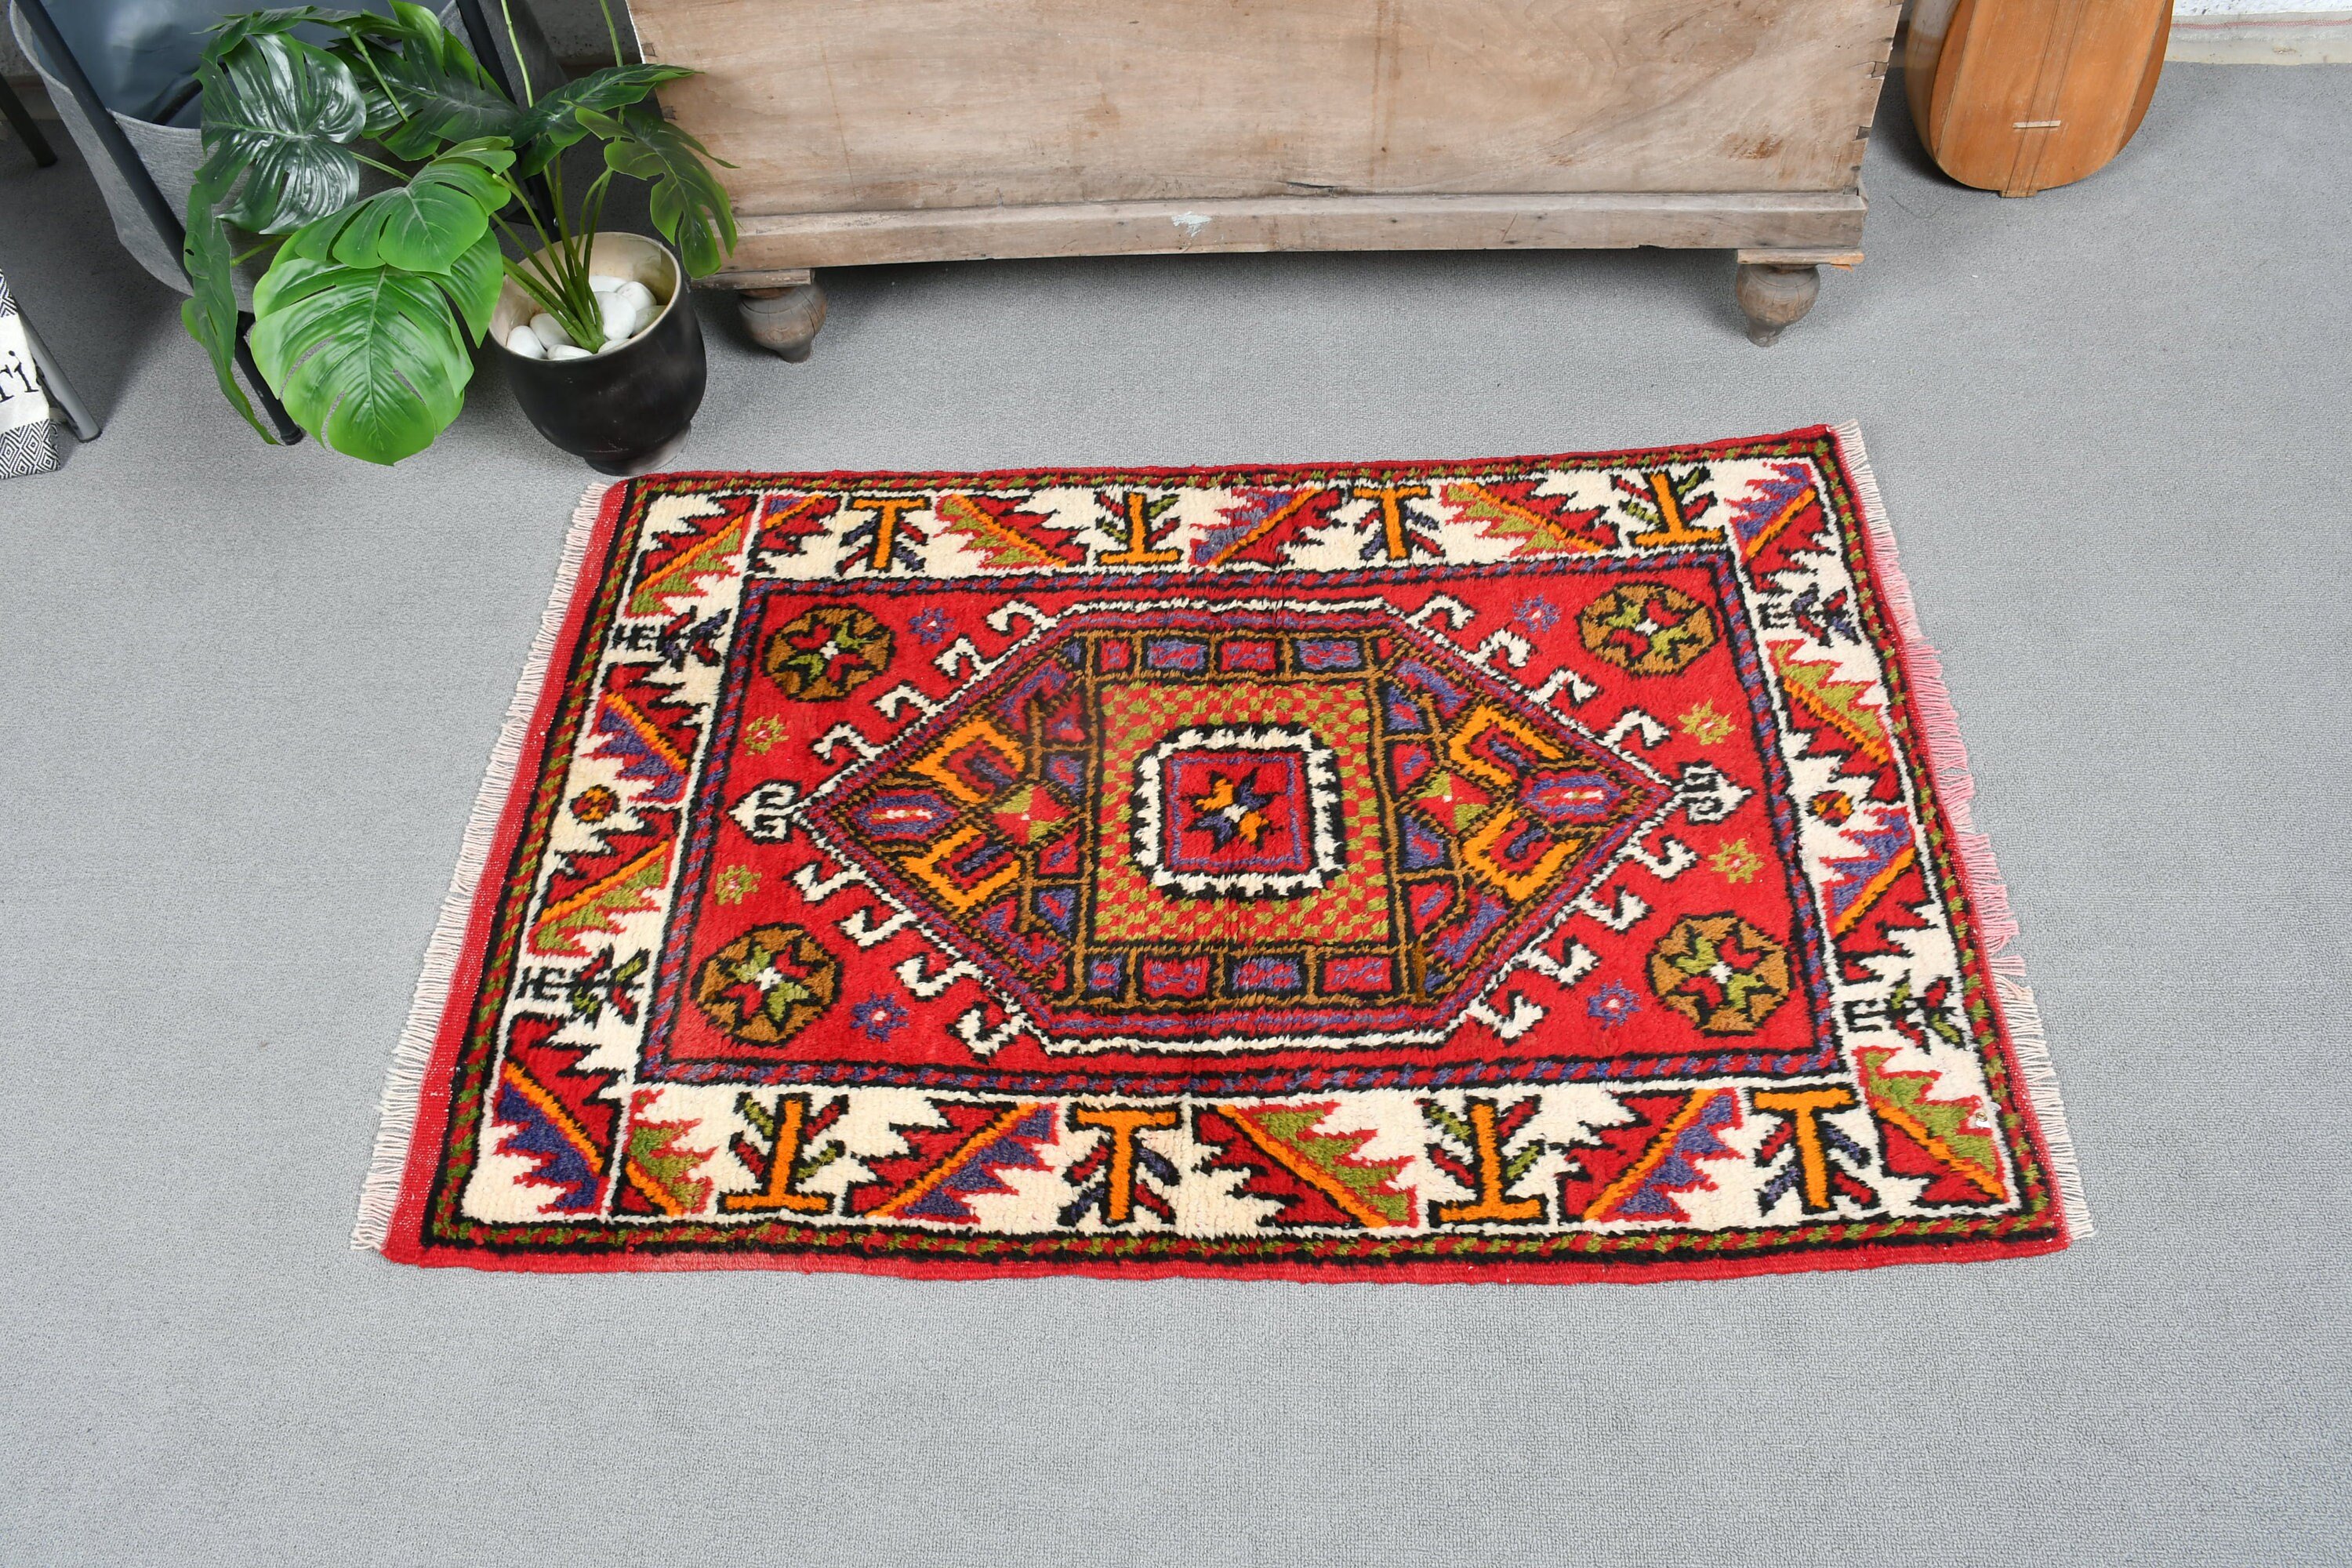 Antique Rug, Vintage Rug, Turkish Rug, Wool Bath Mat Rug, Red Kitchen Rugs, Kitchen Rug, Entry Rug, Rugs for Entry, 2.5x3.7 ft Small Rug